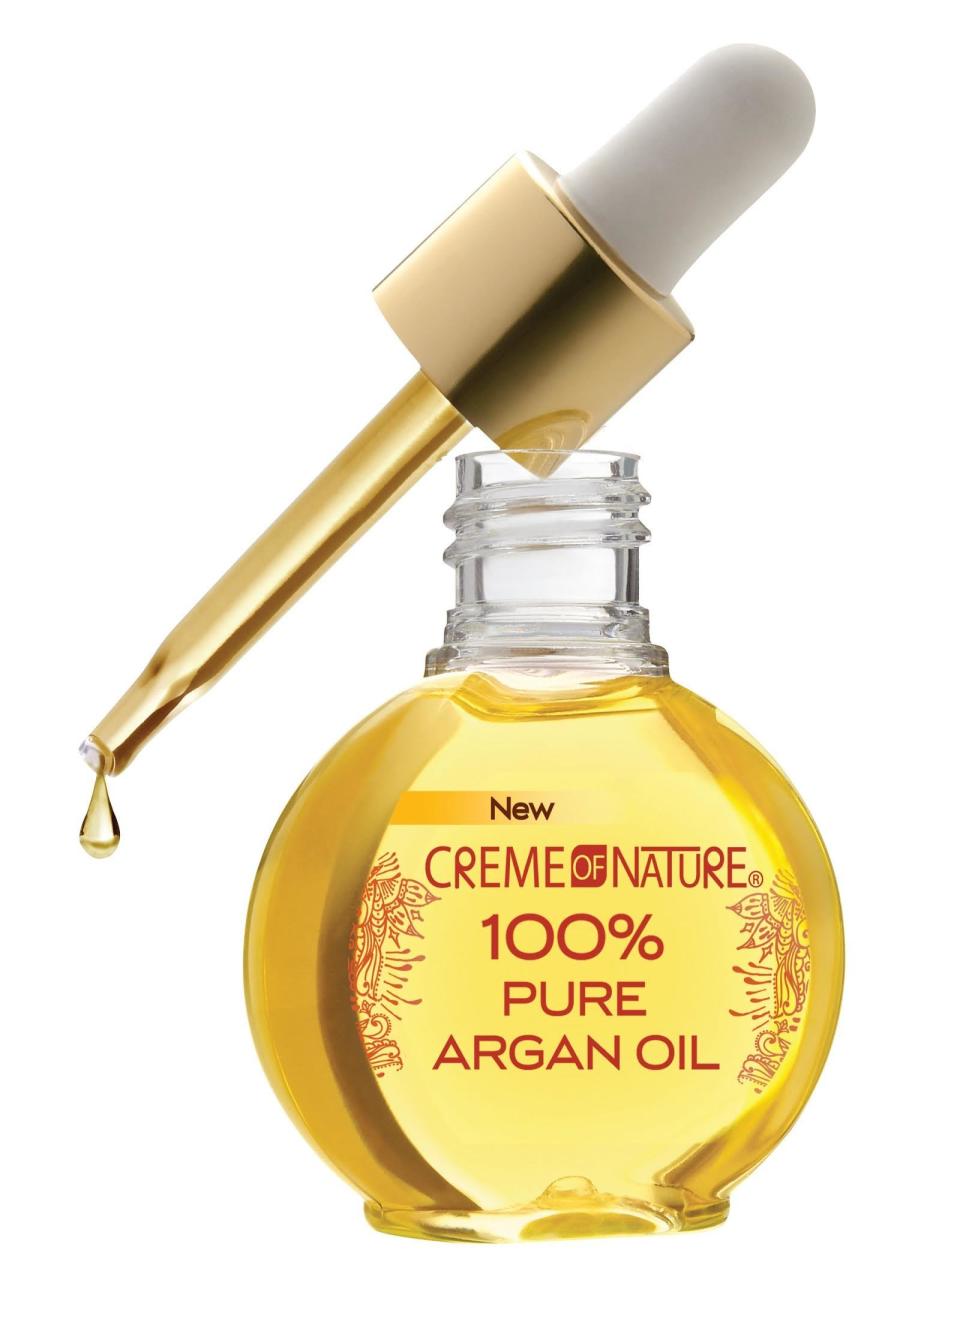 To buy click <a href="http://www.amazon.com/Creme-Nature-100-Pure-Argan/dp/B00BR5ISJC" target="_blank">HERE</a>